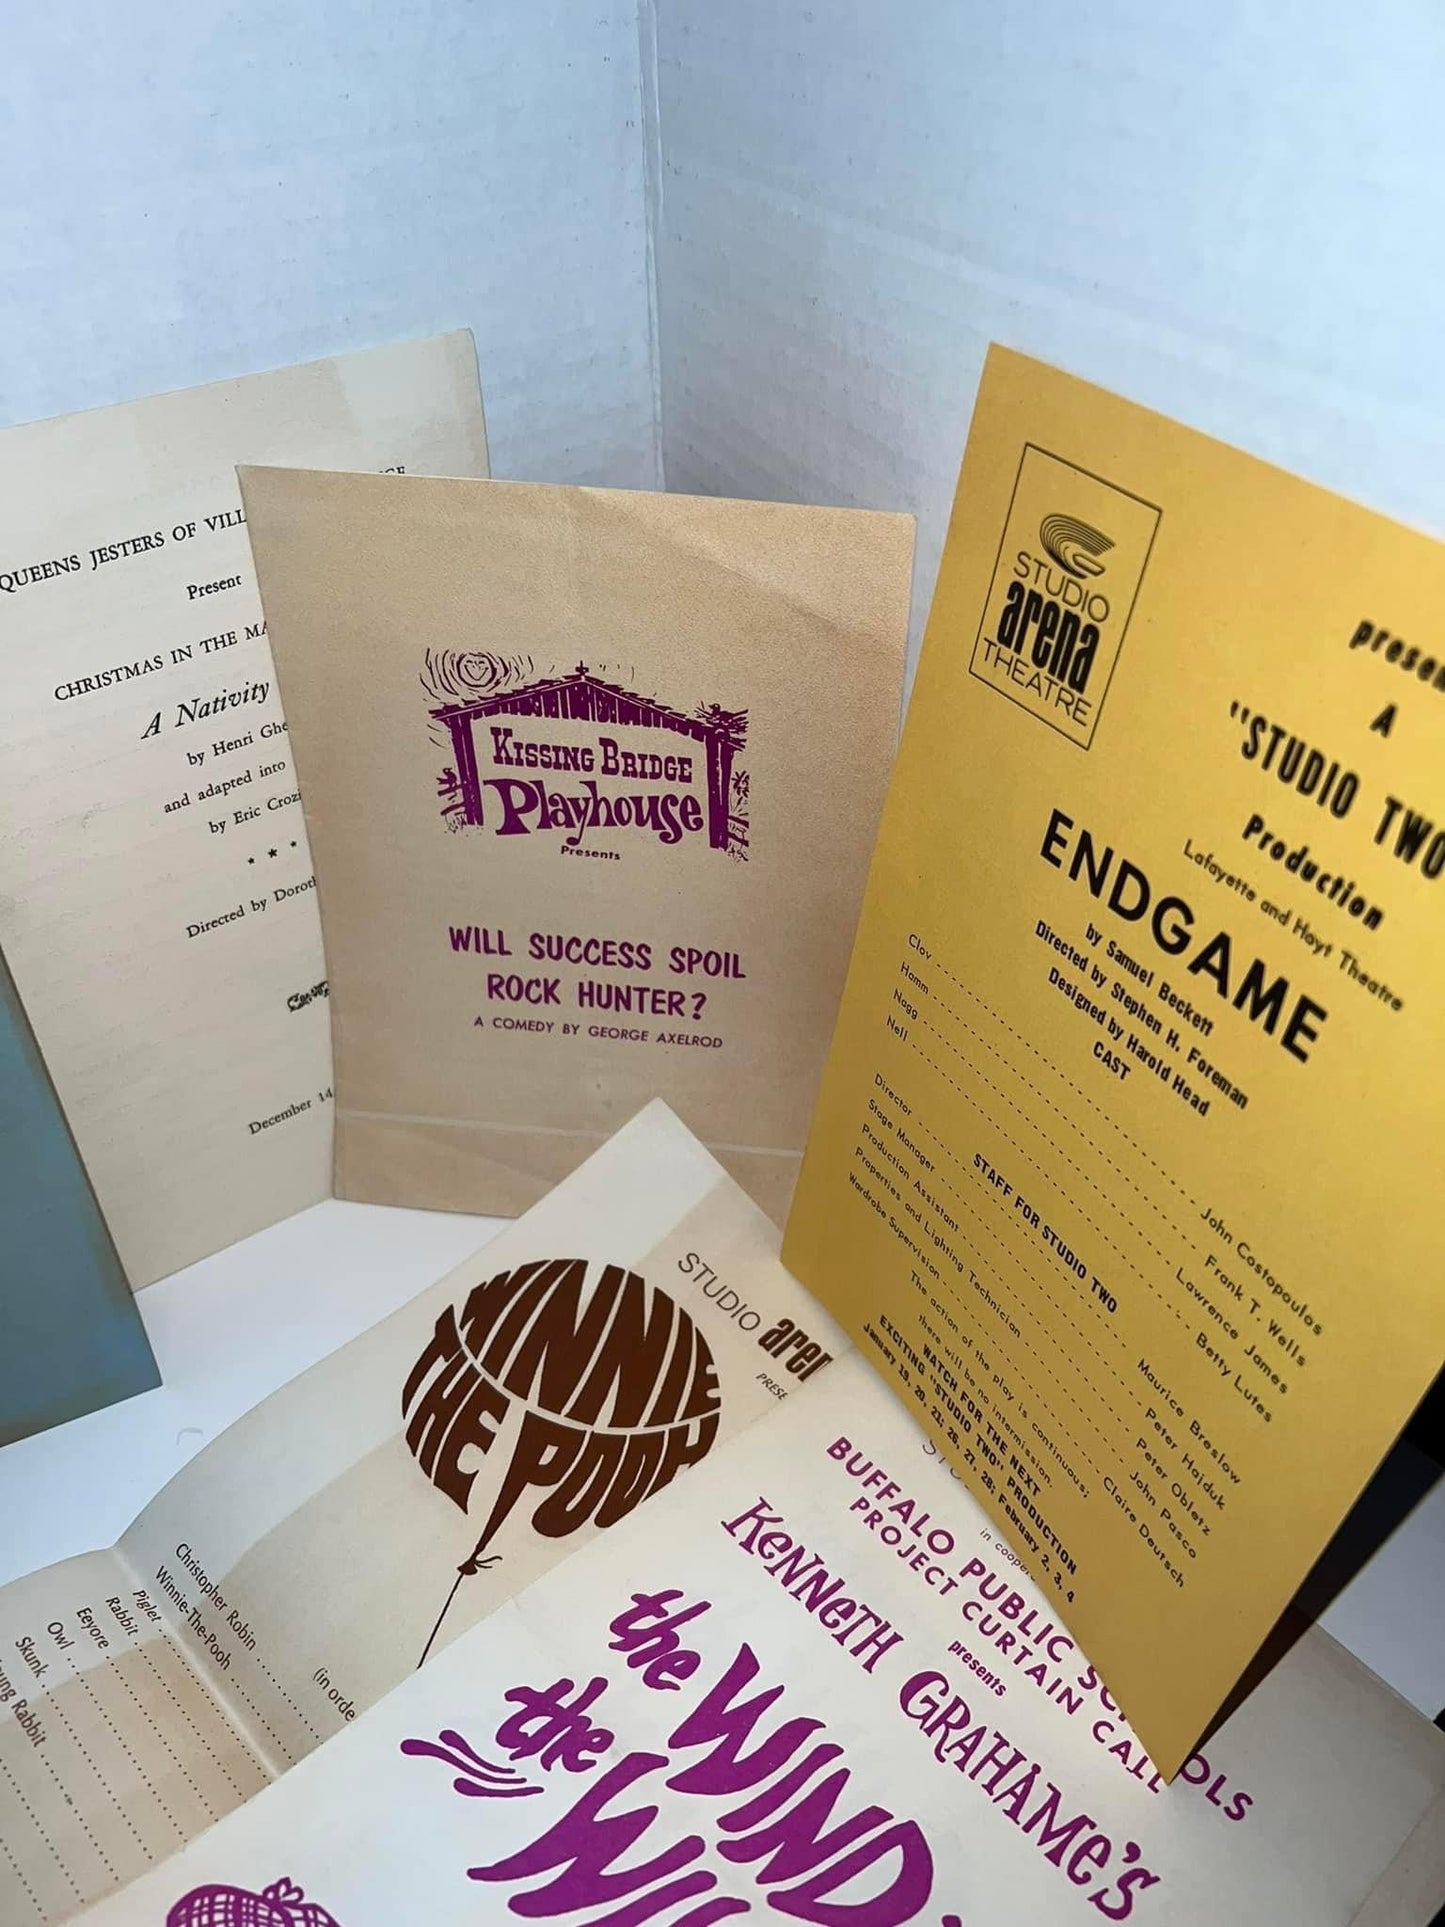 Vintage playbills and broadsides 1960s 3 wind in the willows , Winnie the Pooh & more vintage theater Buffalo New York